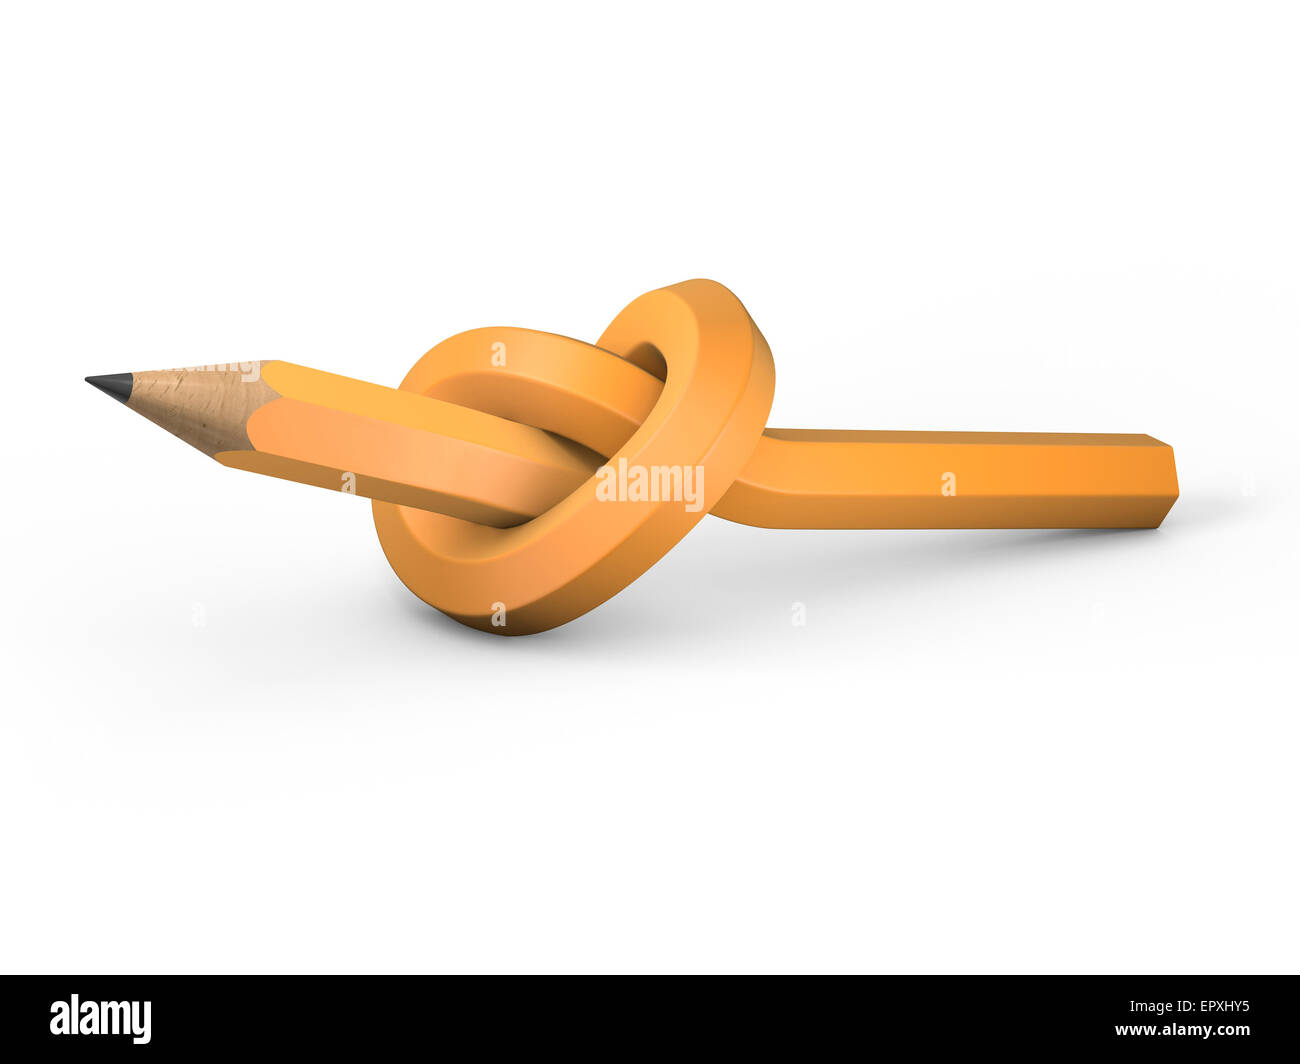 Flexible Pencil On A Turquoise Notebook Bent Pencils Twocolor Stock Photo -  Download Image Now - iStock